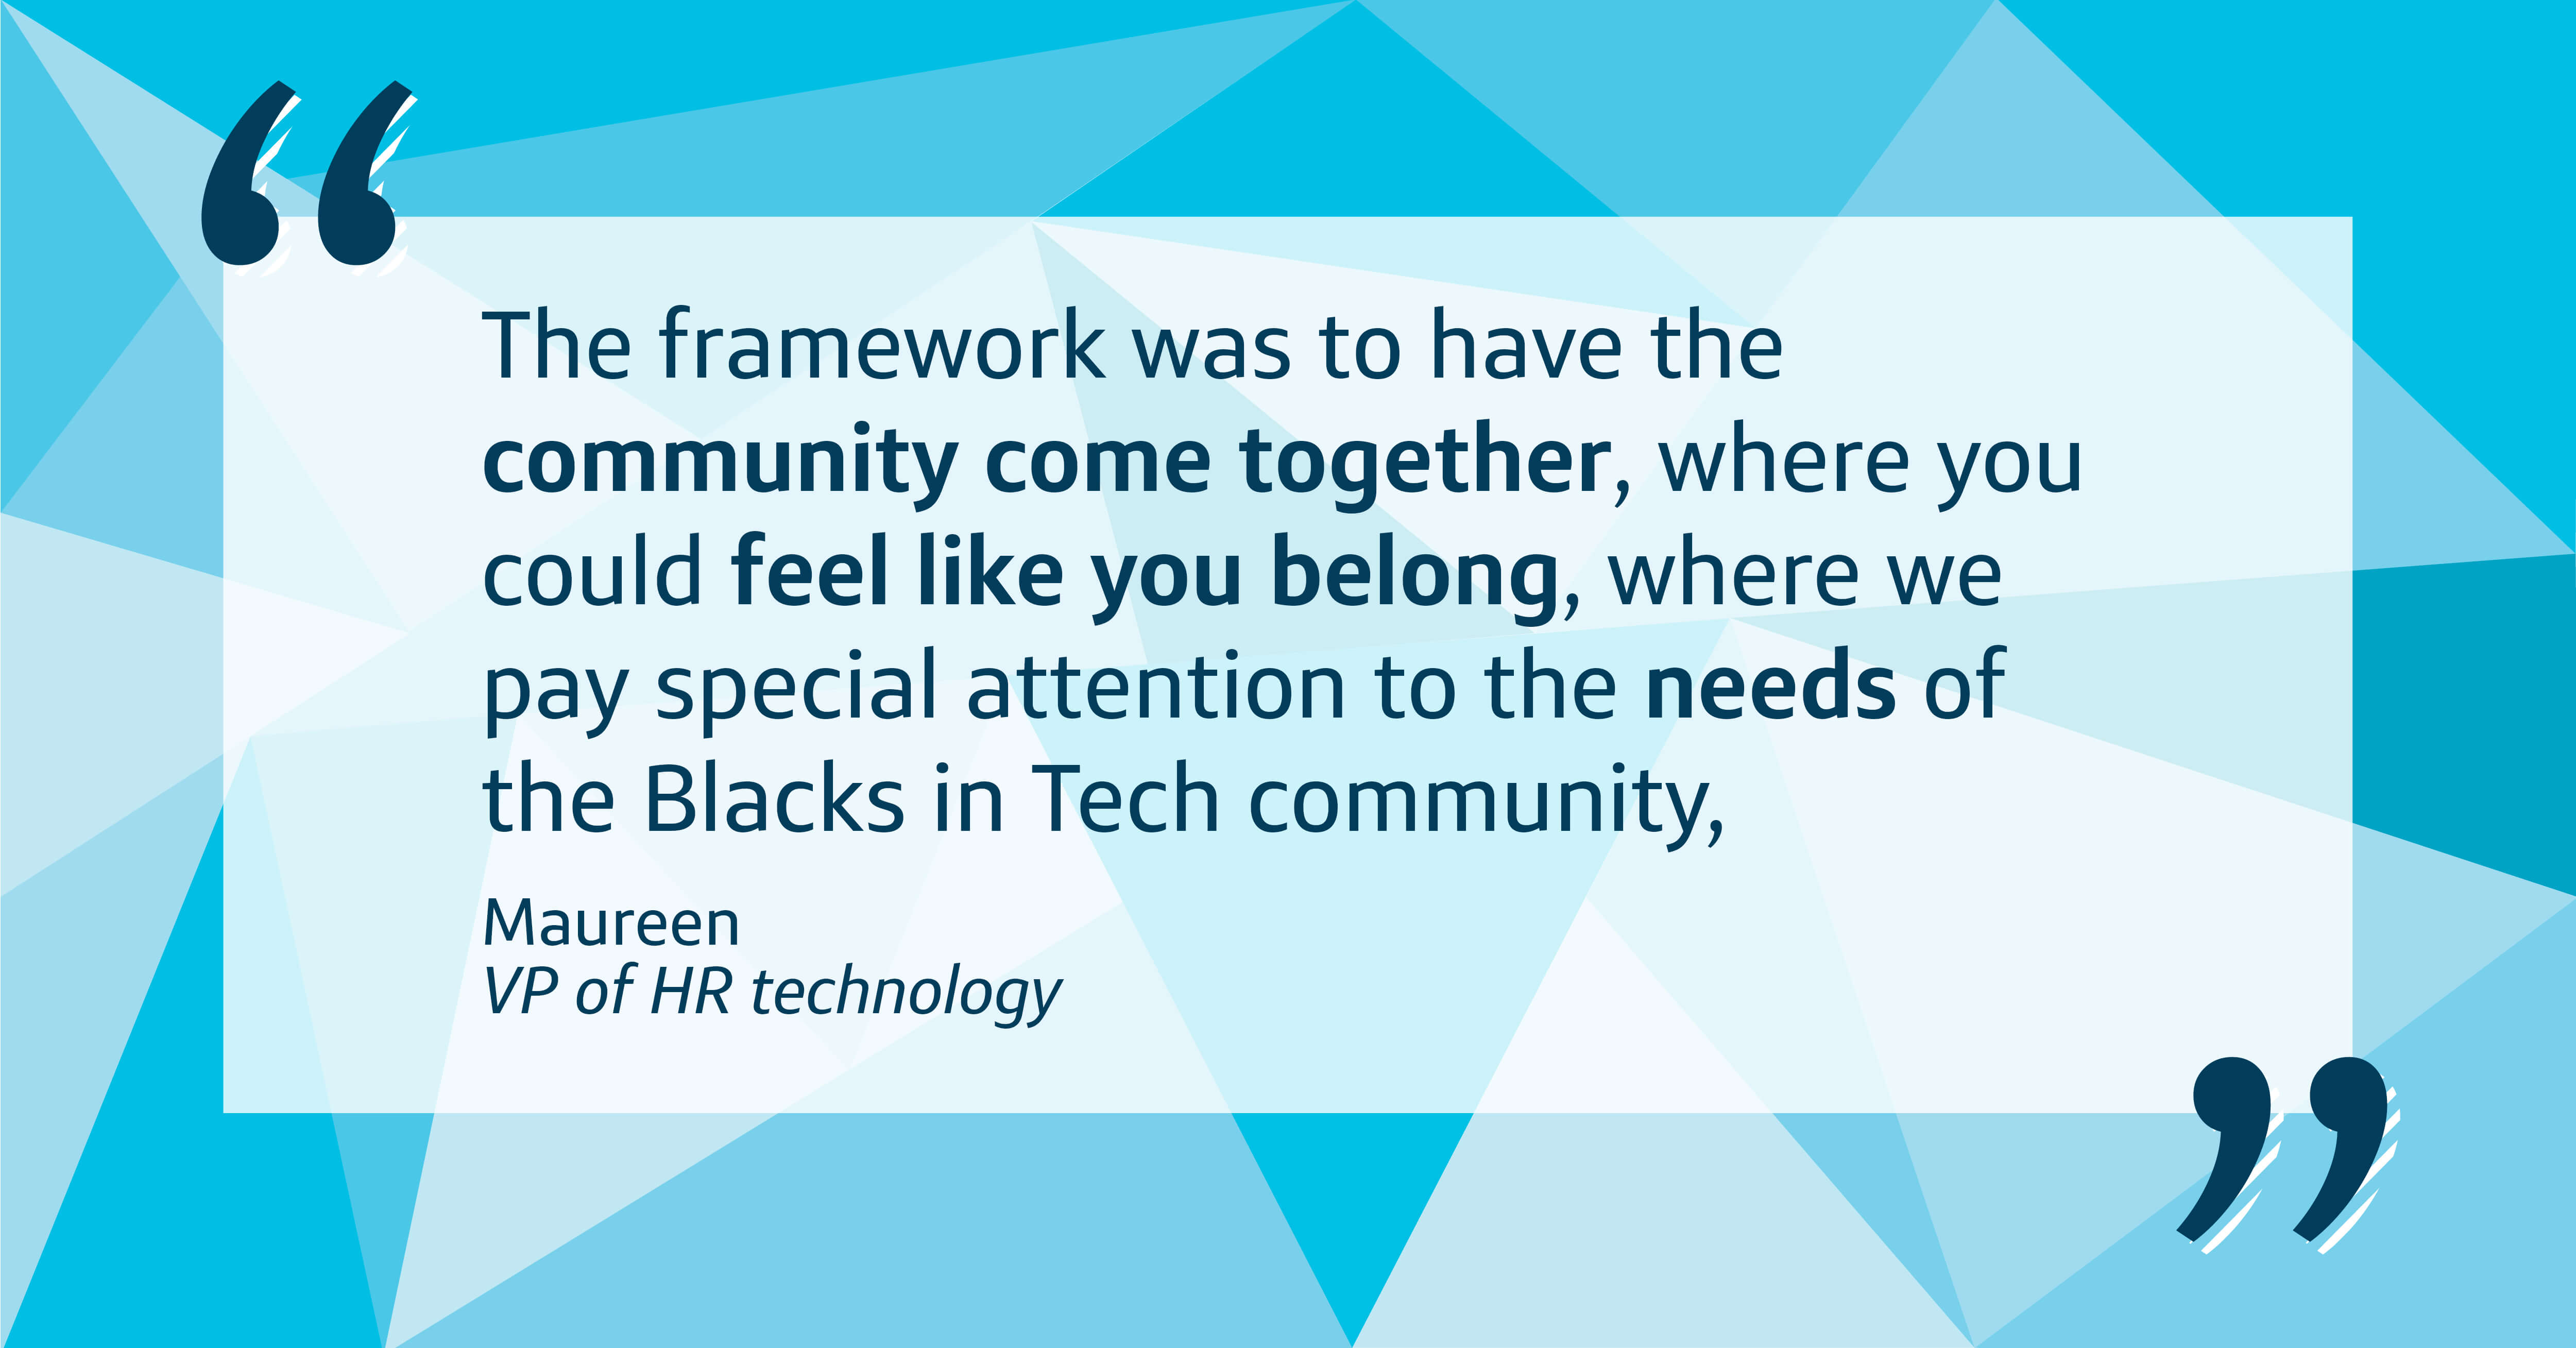 The framework for BIT Summit was to have the community come together, where you could feel like you belong, where we pay special attention to the needs of the Blacks in Tech community